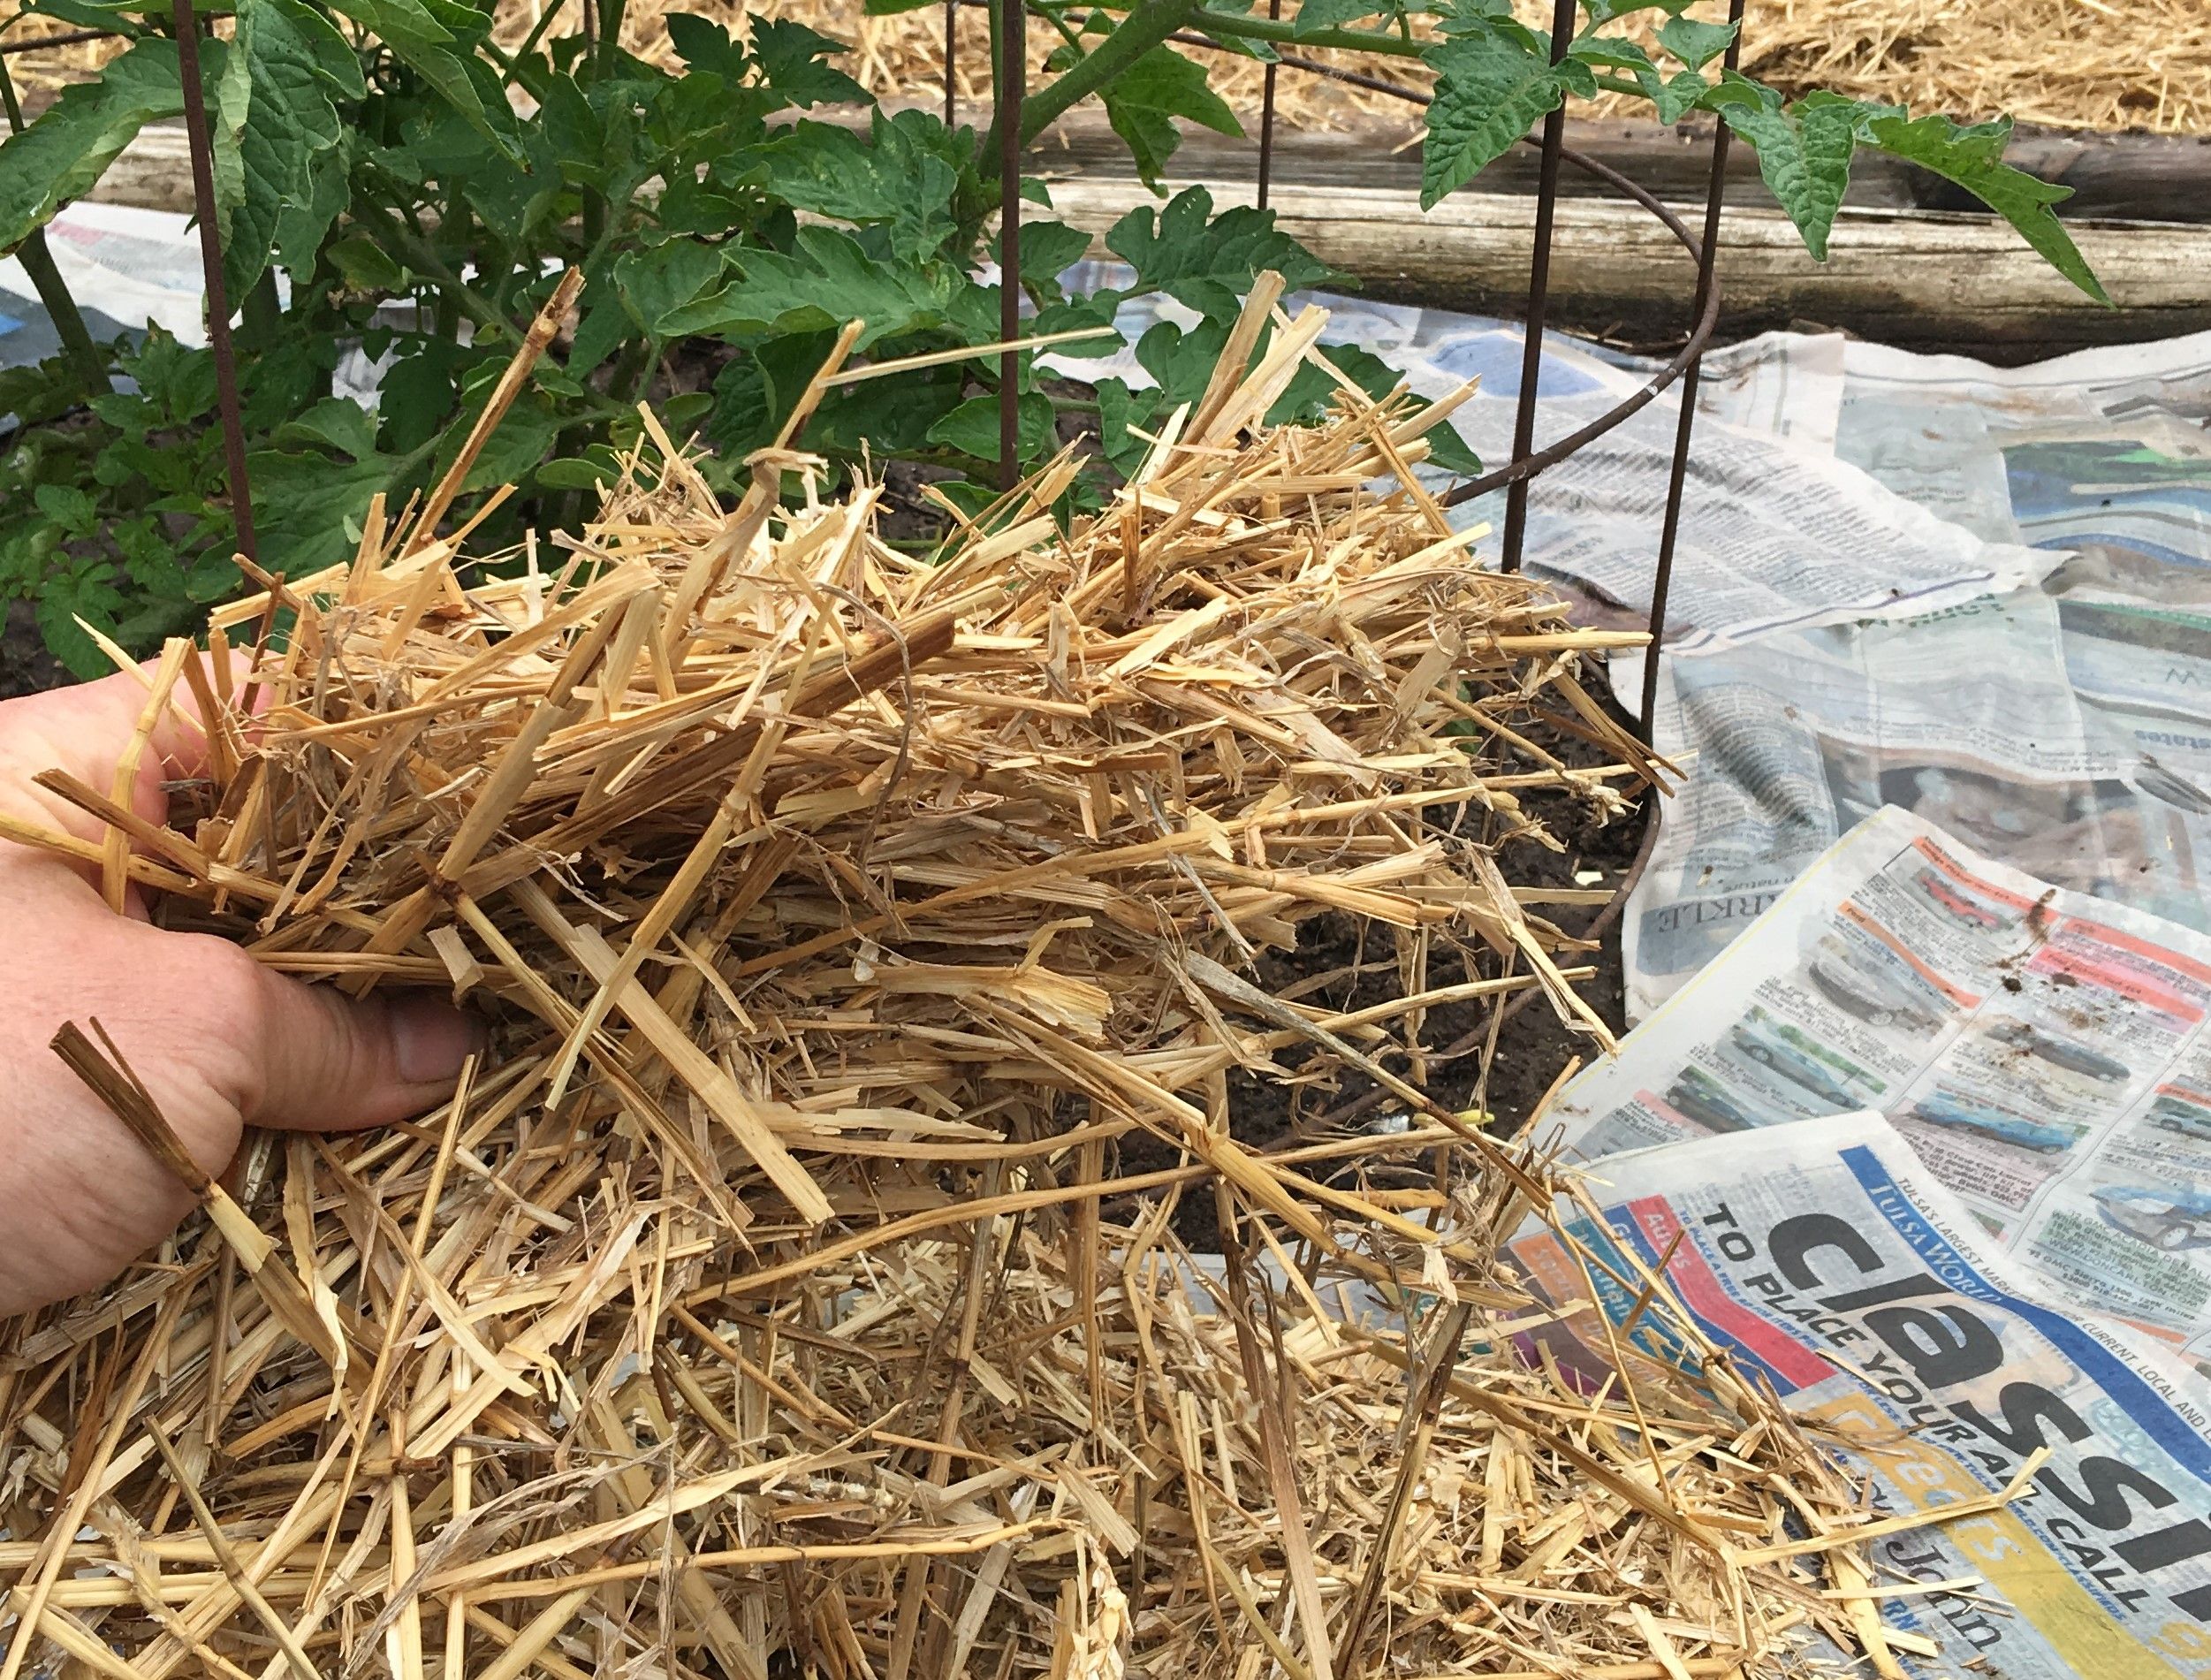 Mulching around the tomatoes with newspaper and straw. A great way to control weeds.